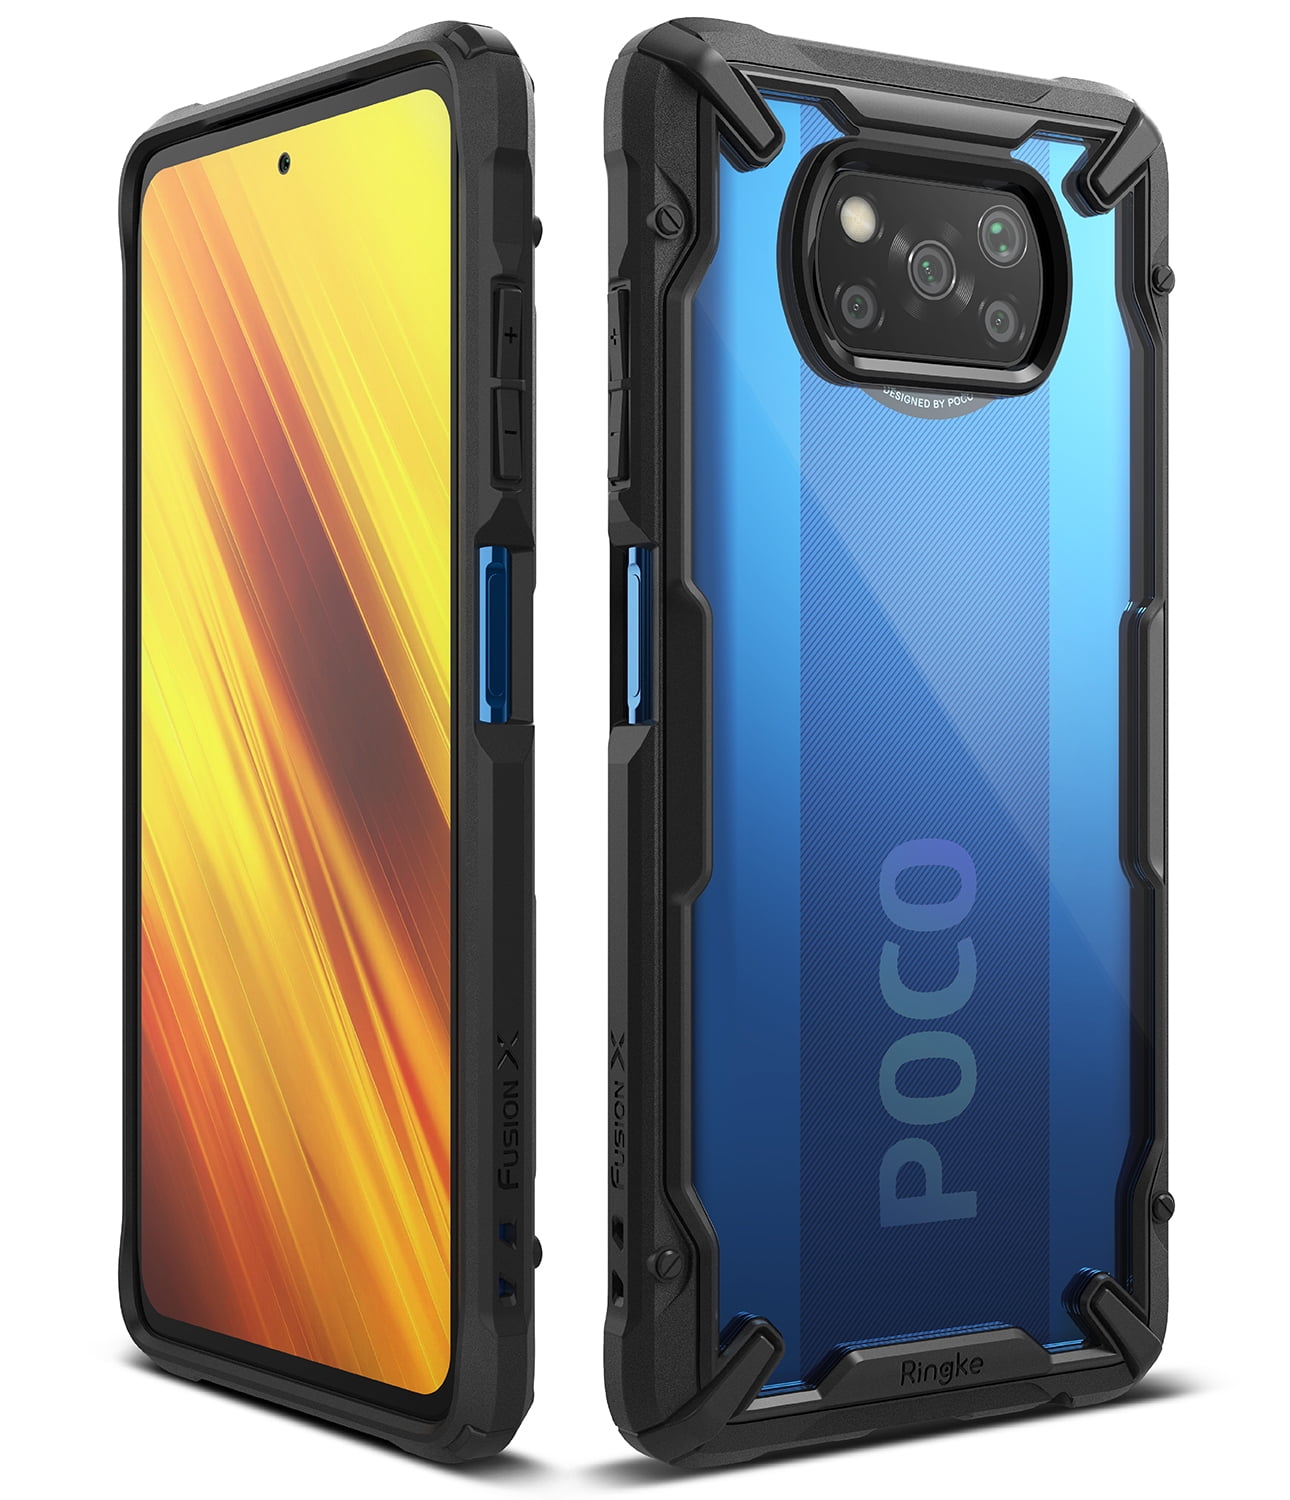 Tempered glass film 360 degrees ultra thin Matte All-inclusive Protection 3 in 1 PC Phone case cover Joytag Compatible For Xiaomi Poco X3 NFC case Blue black